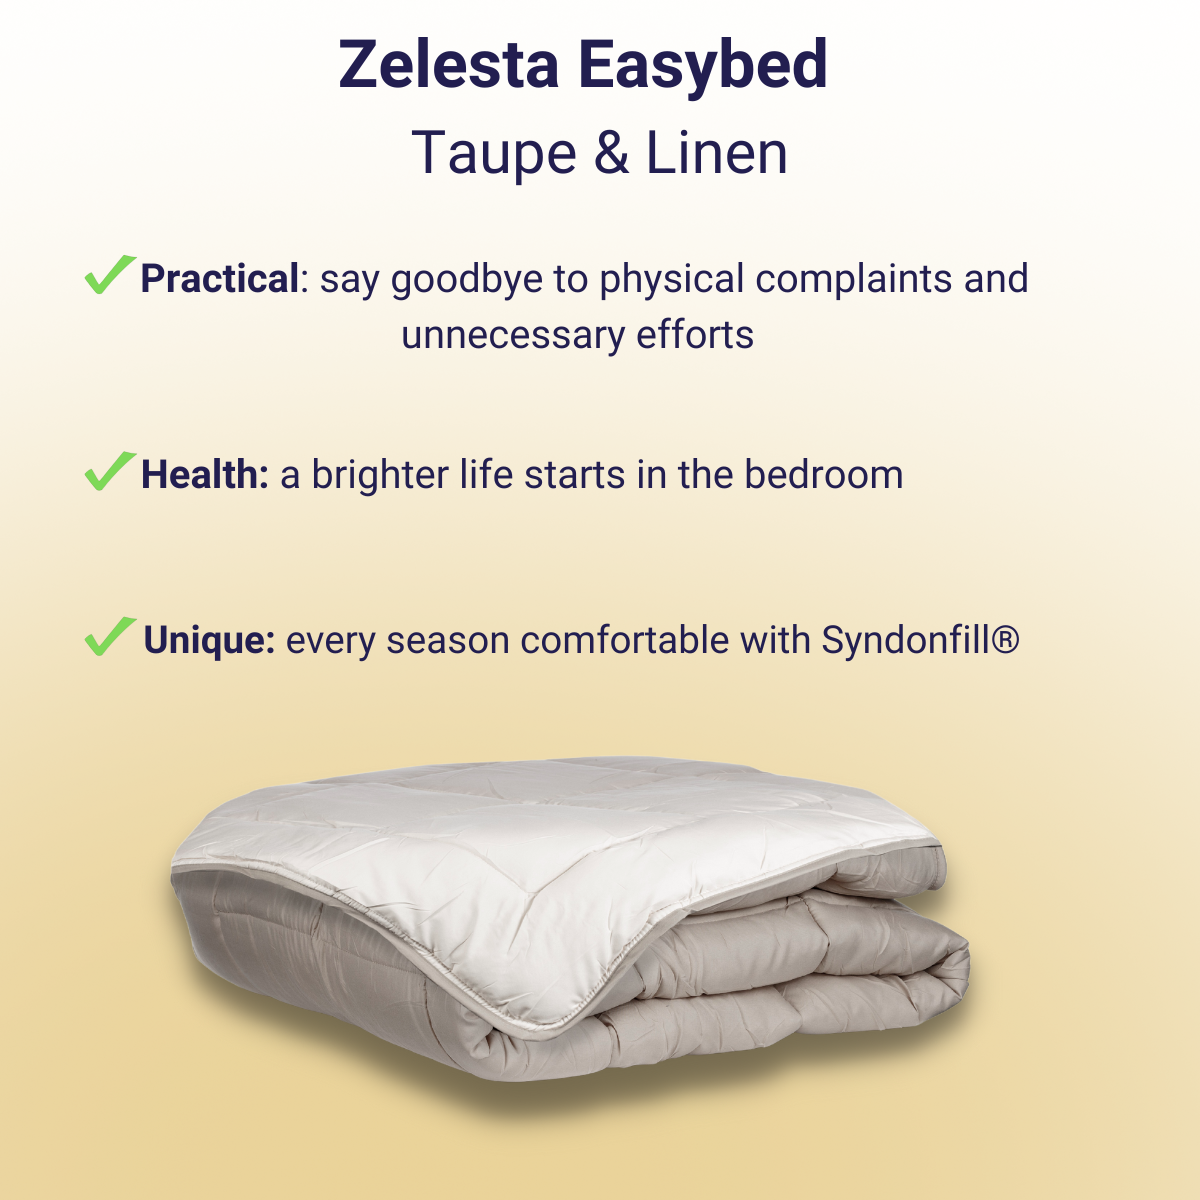 Zelesta-Easybed - Taupe-Linen-washable-quilt-2-in-1-without-cover-benefits